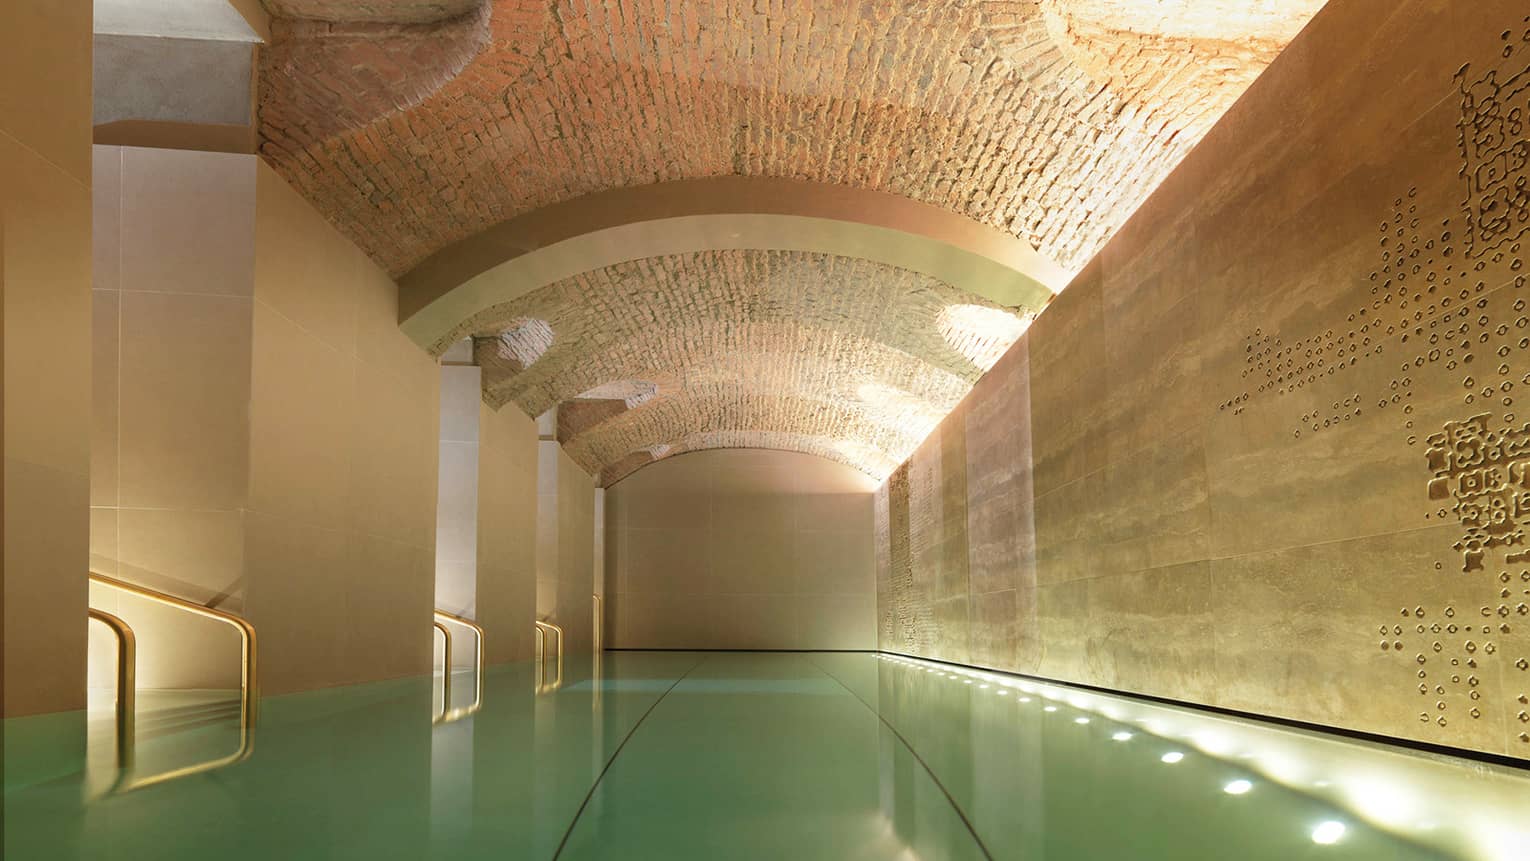 Indoor lap swimming pool with gold railings under curved stone ceiling